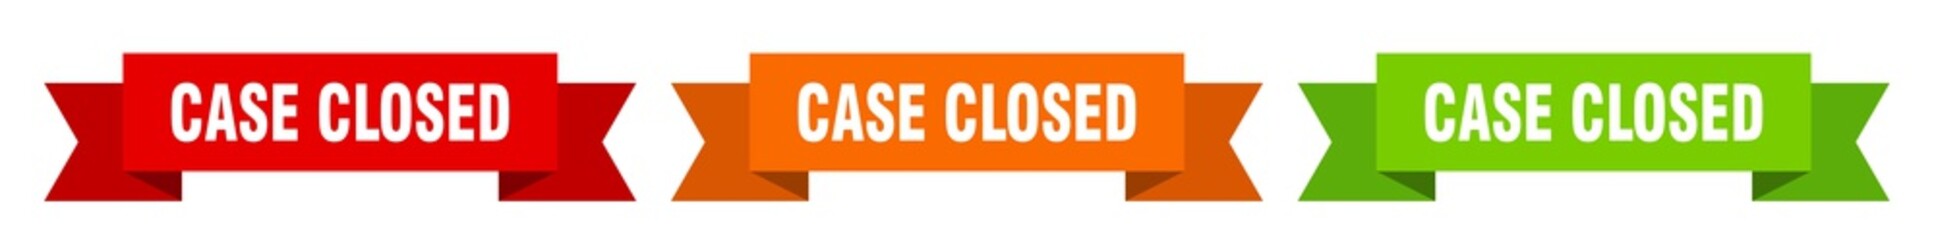 case closed ribbon. case closed isolated paper sign. banner